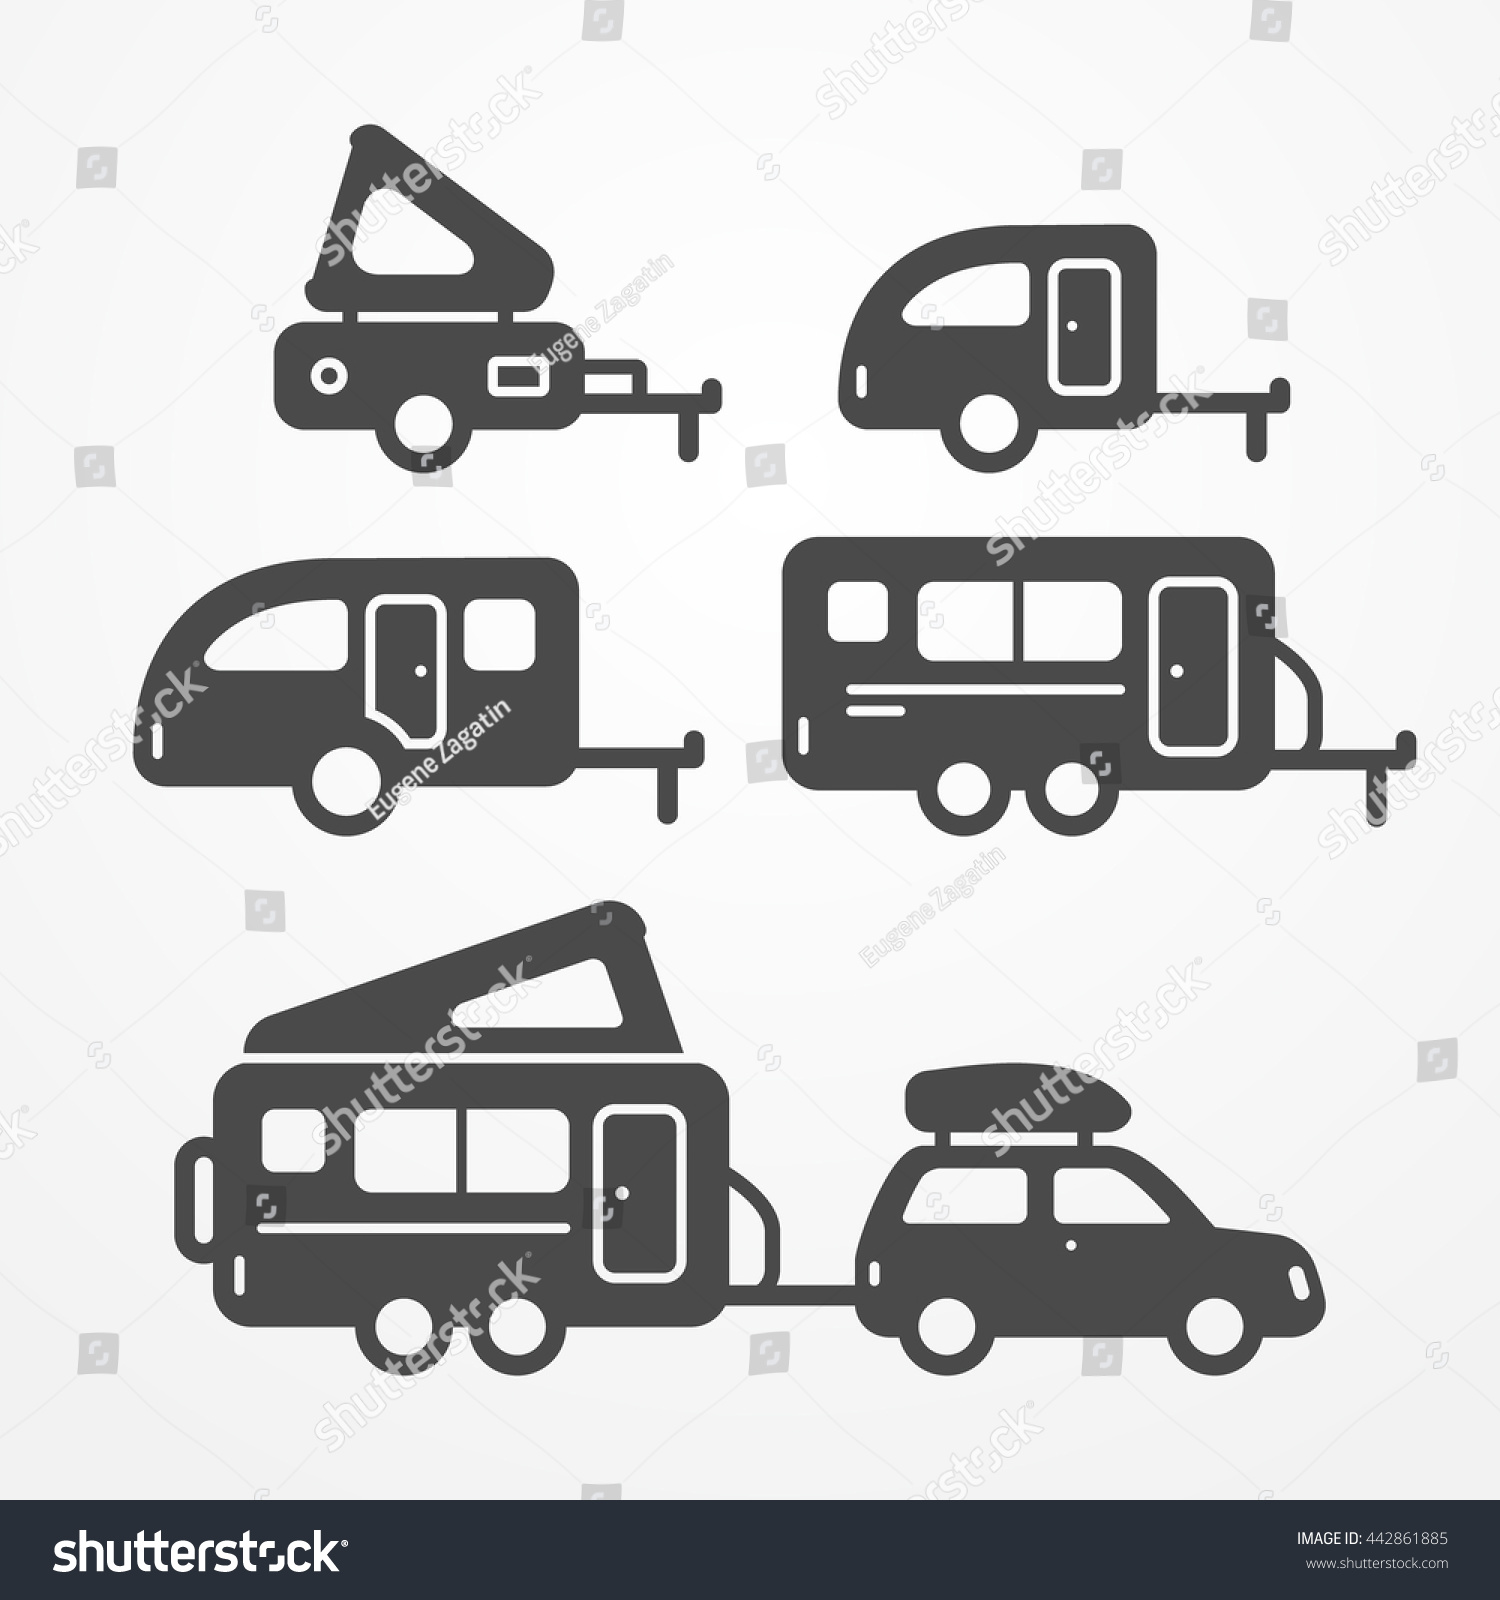 Set Camping Trailer Icons Travel Trailer Stock Vector (Royalty Free ...